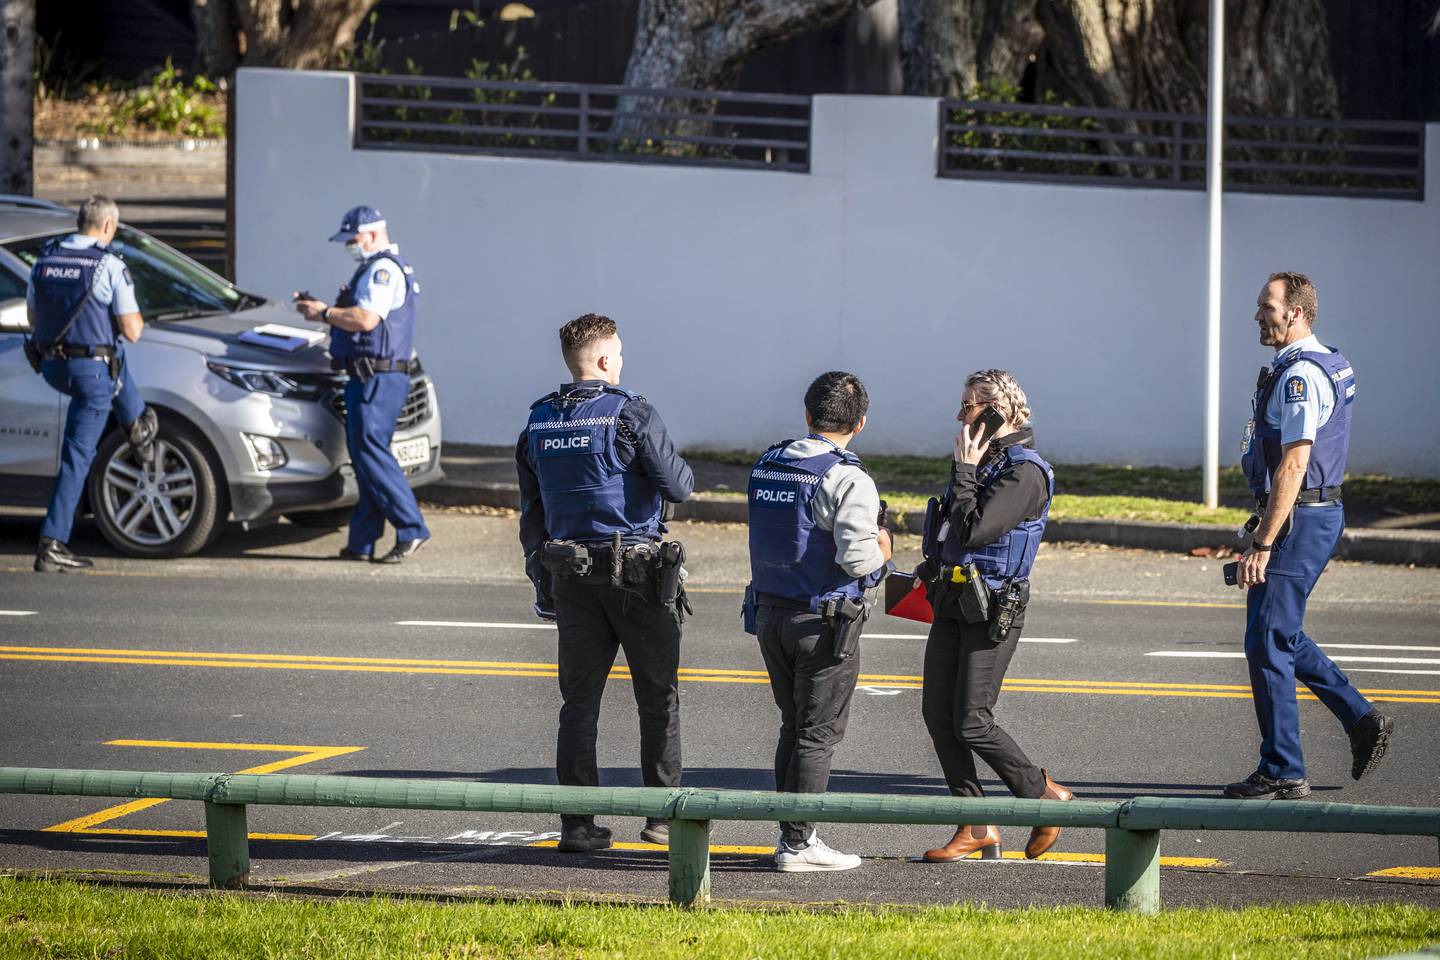 Authorities say a man wounded some people in a stabbing rampage in a New Zealand city before bystanders brought him to the ground.  AP